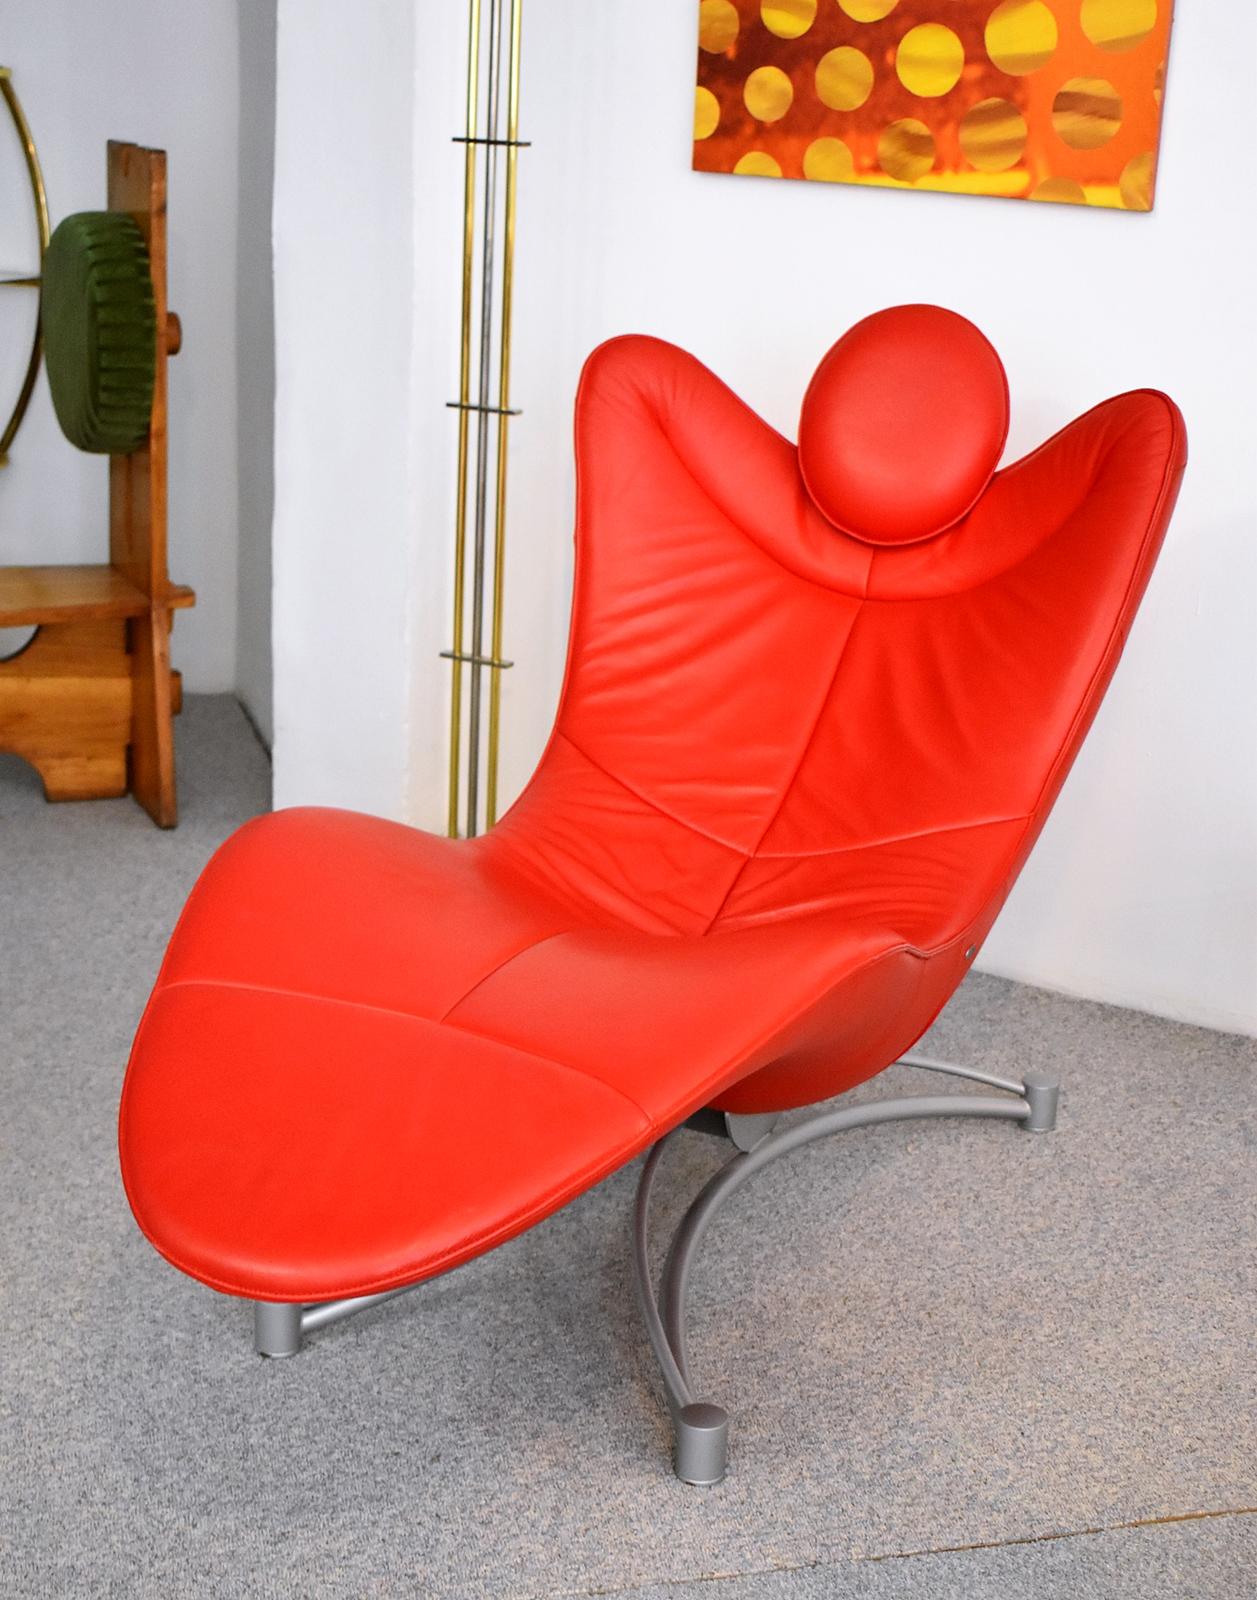 Designer chaise longue by De Sede model DS 151. Designed by Jane Worthington circa 2009. Red leather upholstery with polished steel base.

